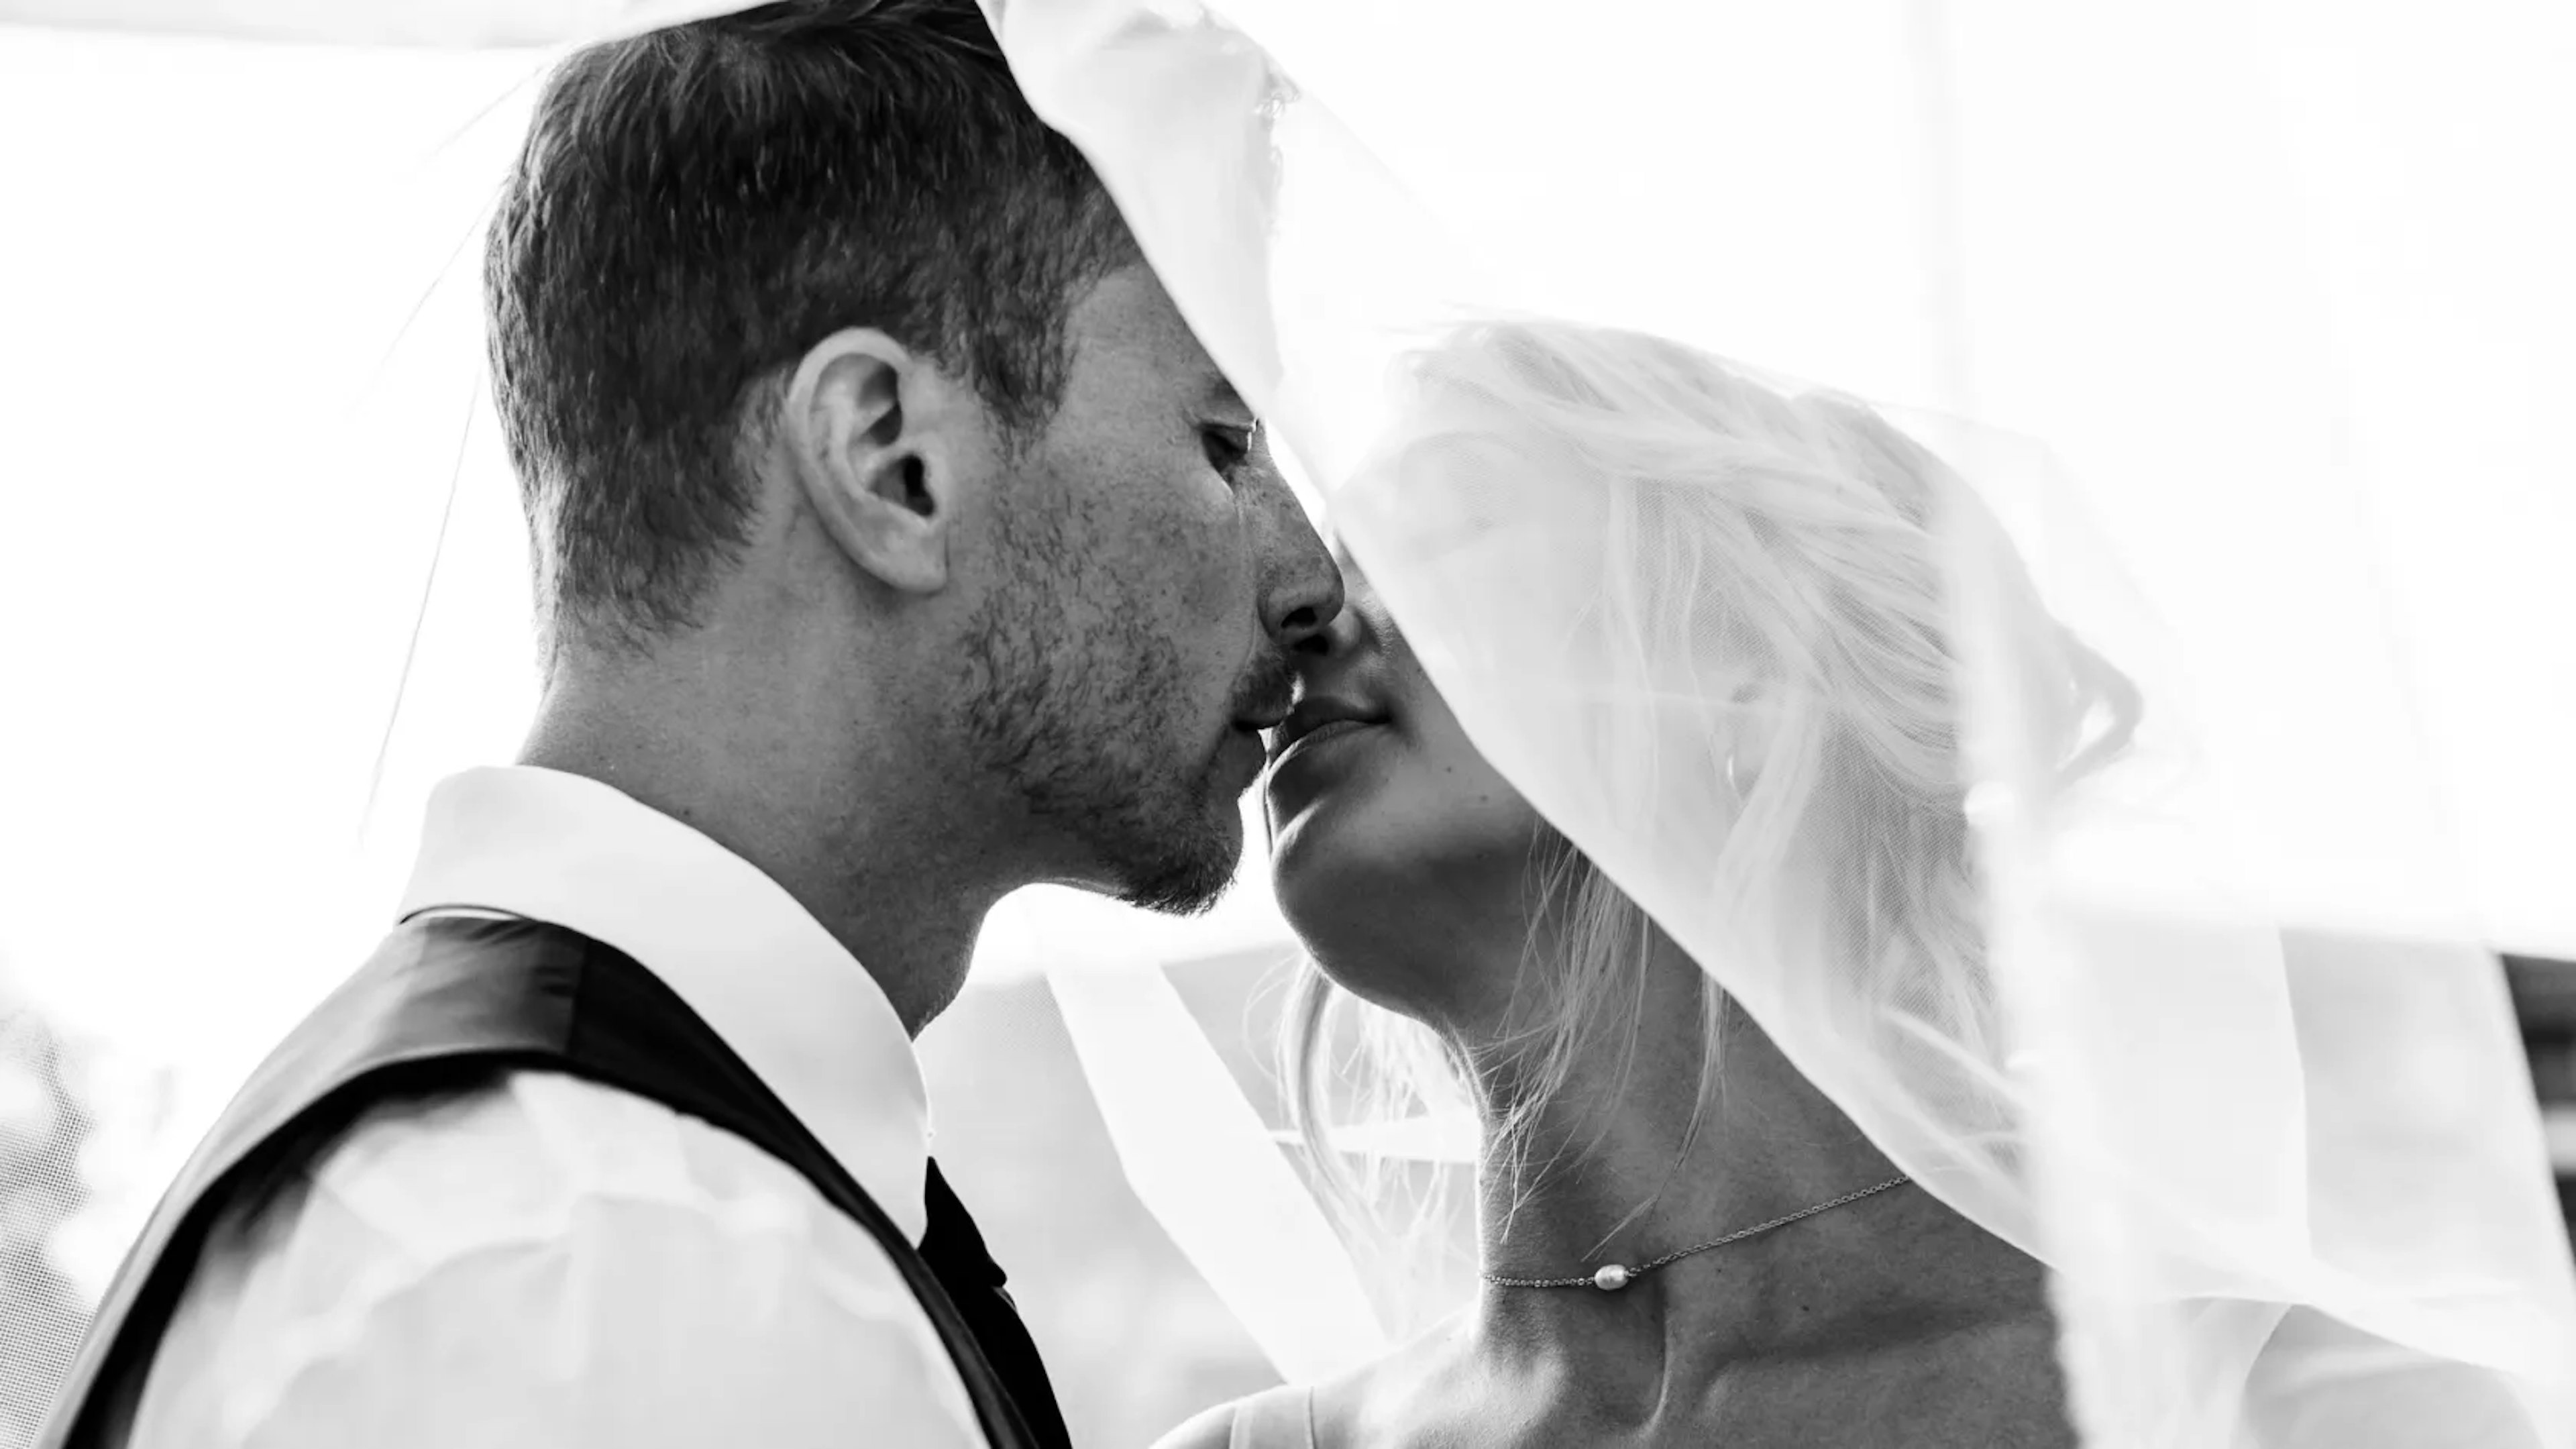 A bride and groom share an intimate moment, their faces close together, with the bride's veil softly enveloping them both in a black and white photograph that emphasizes the romantic intensity of their connection.